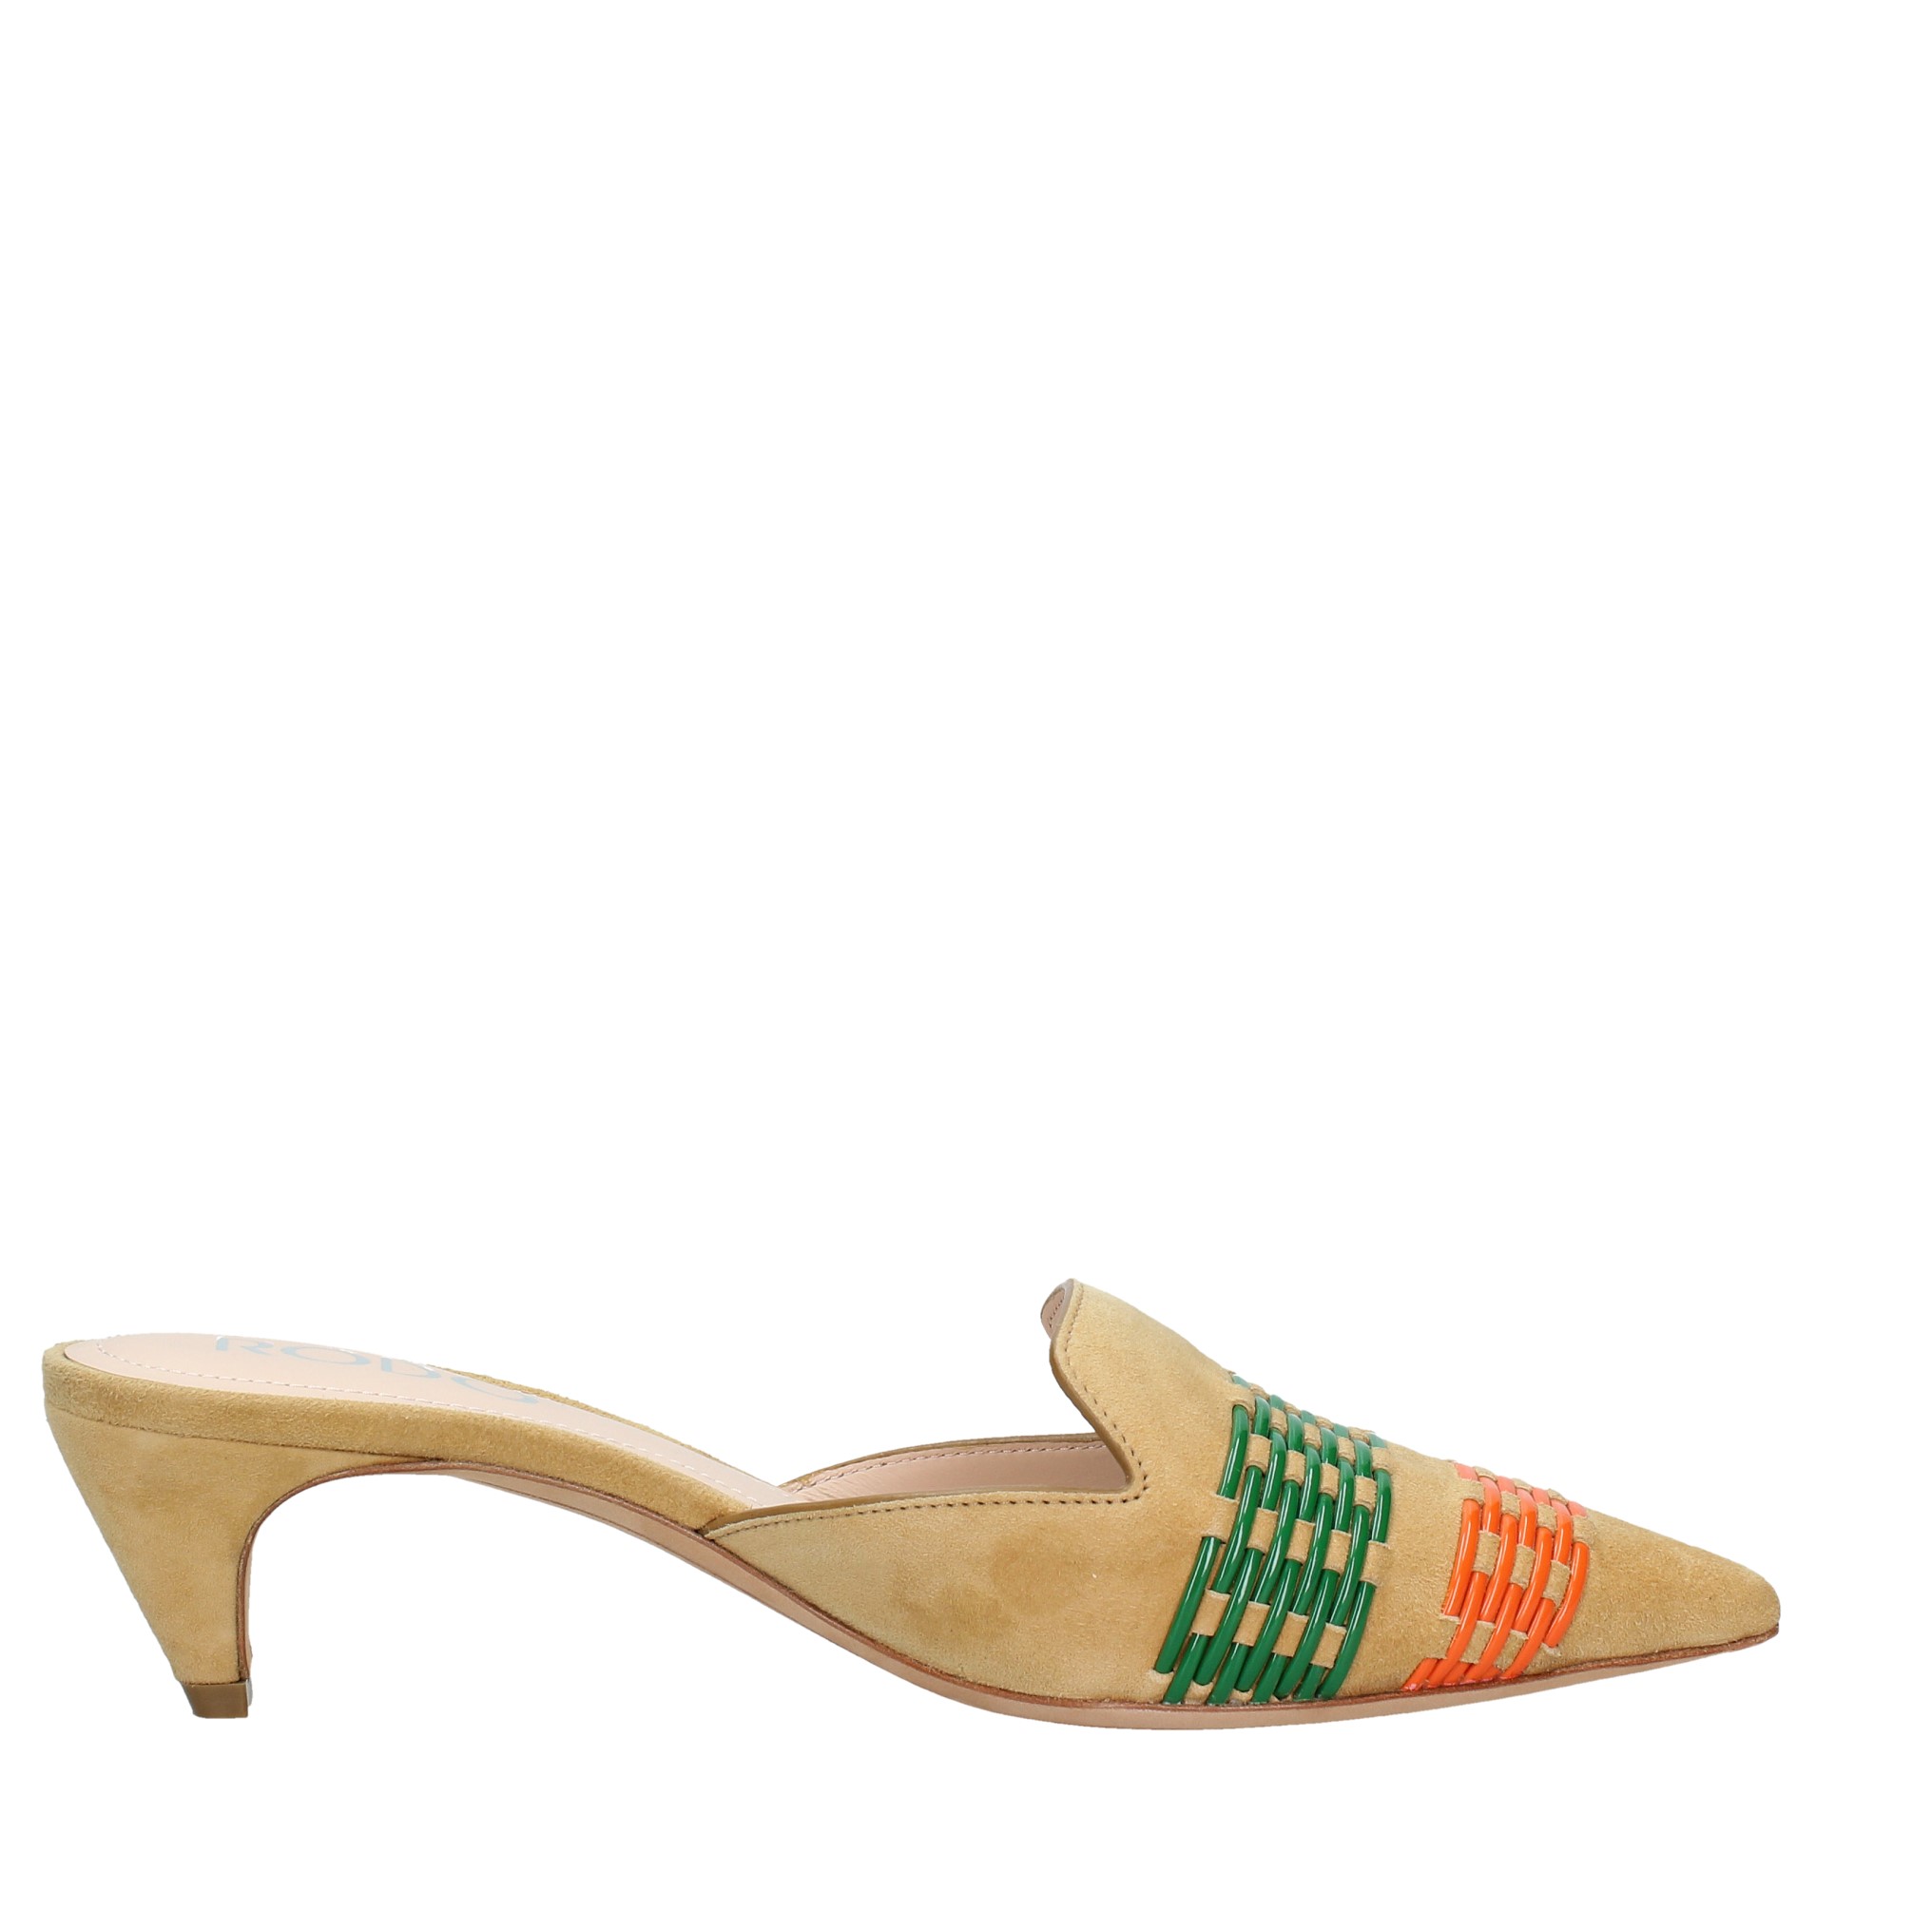 Suede mules and sabots woven pvc inserts - RODO - Ginevra calzature